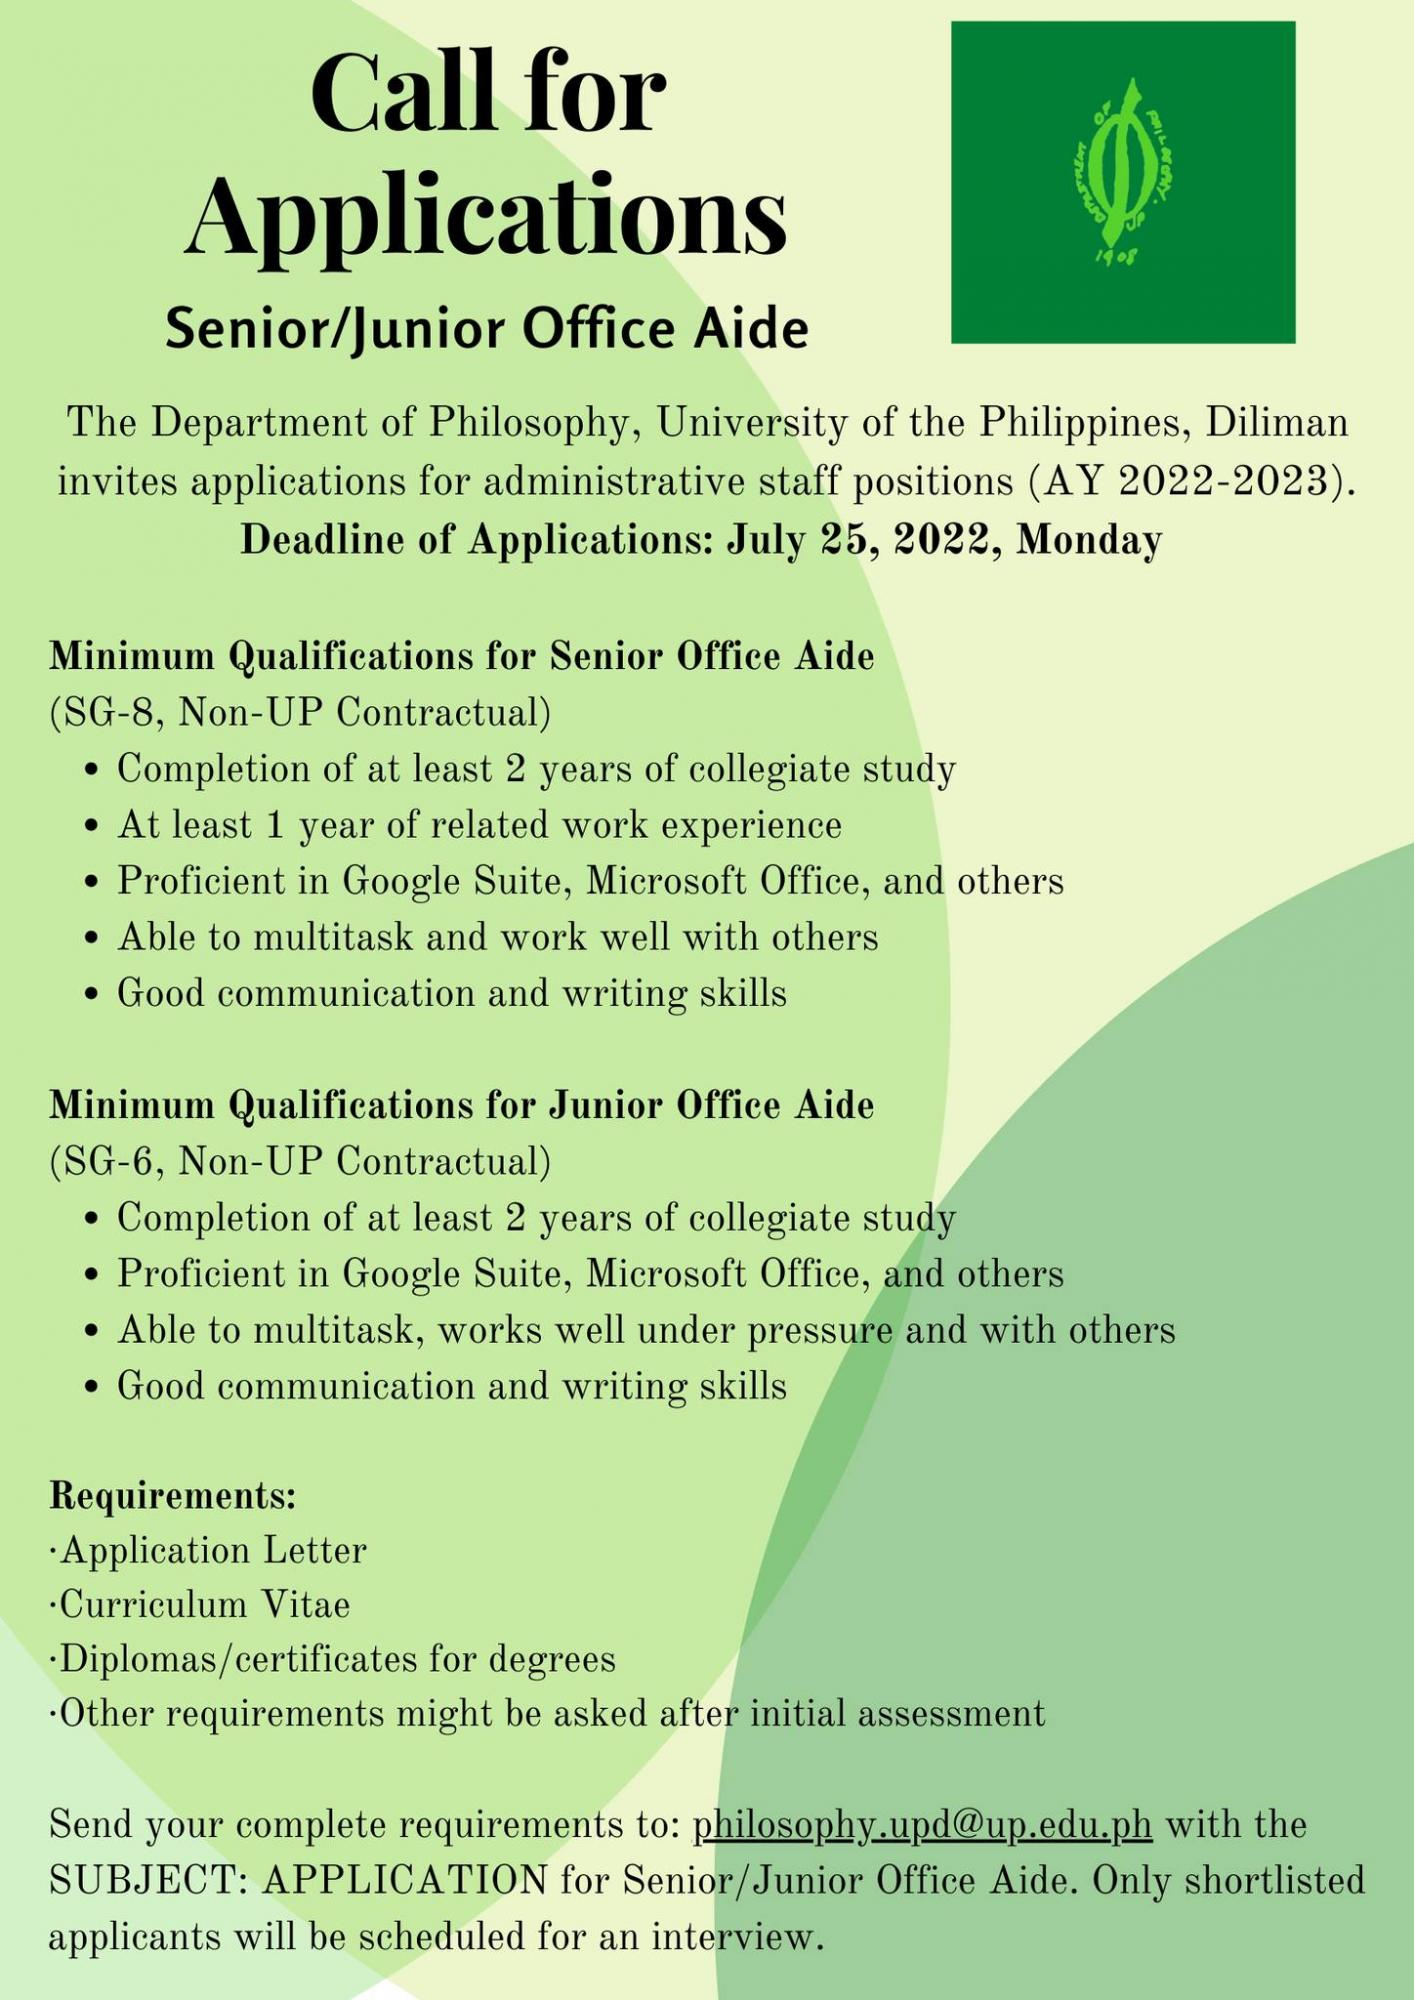 Call For Applications (Senior/Junior Office Aide)